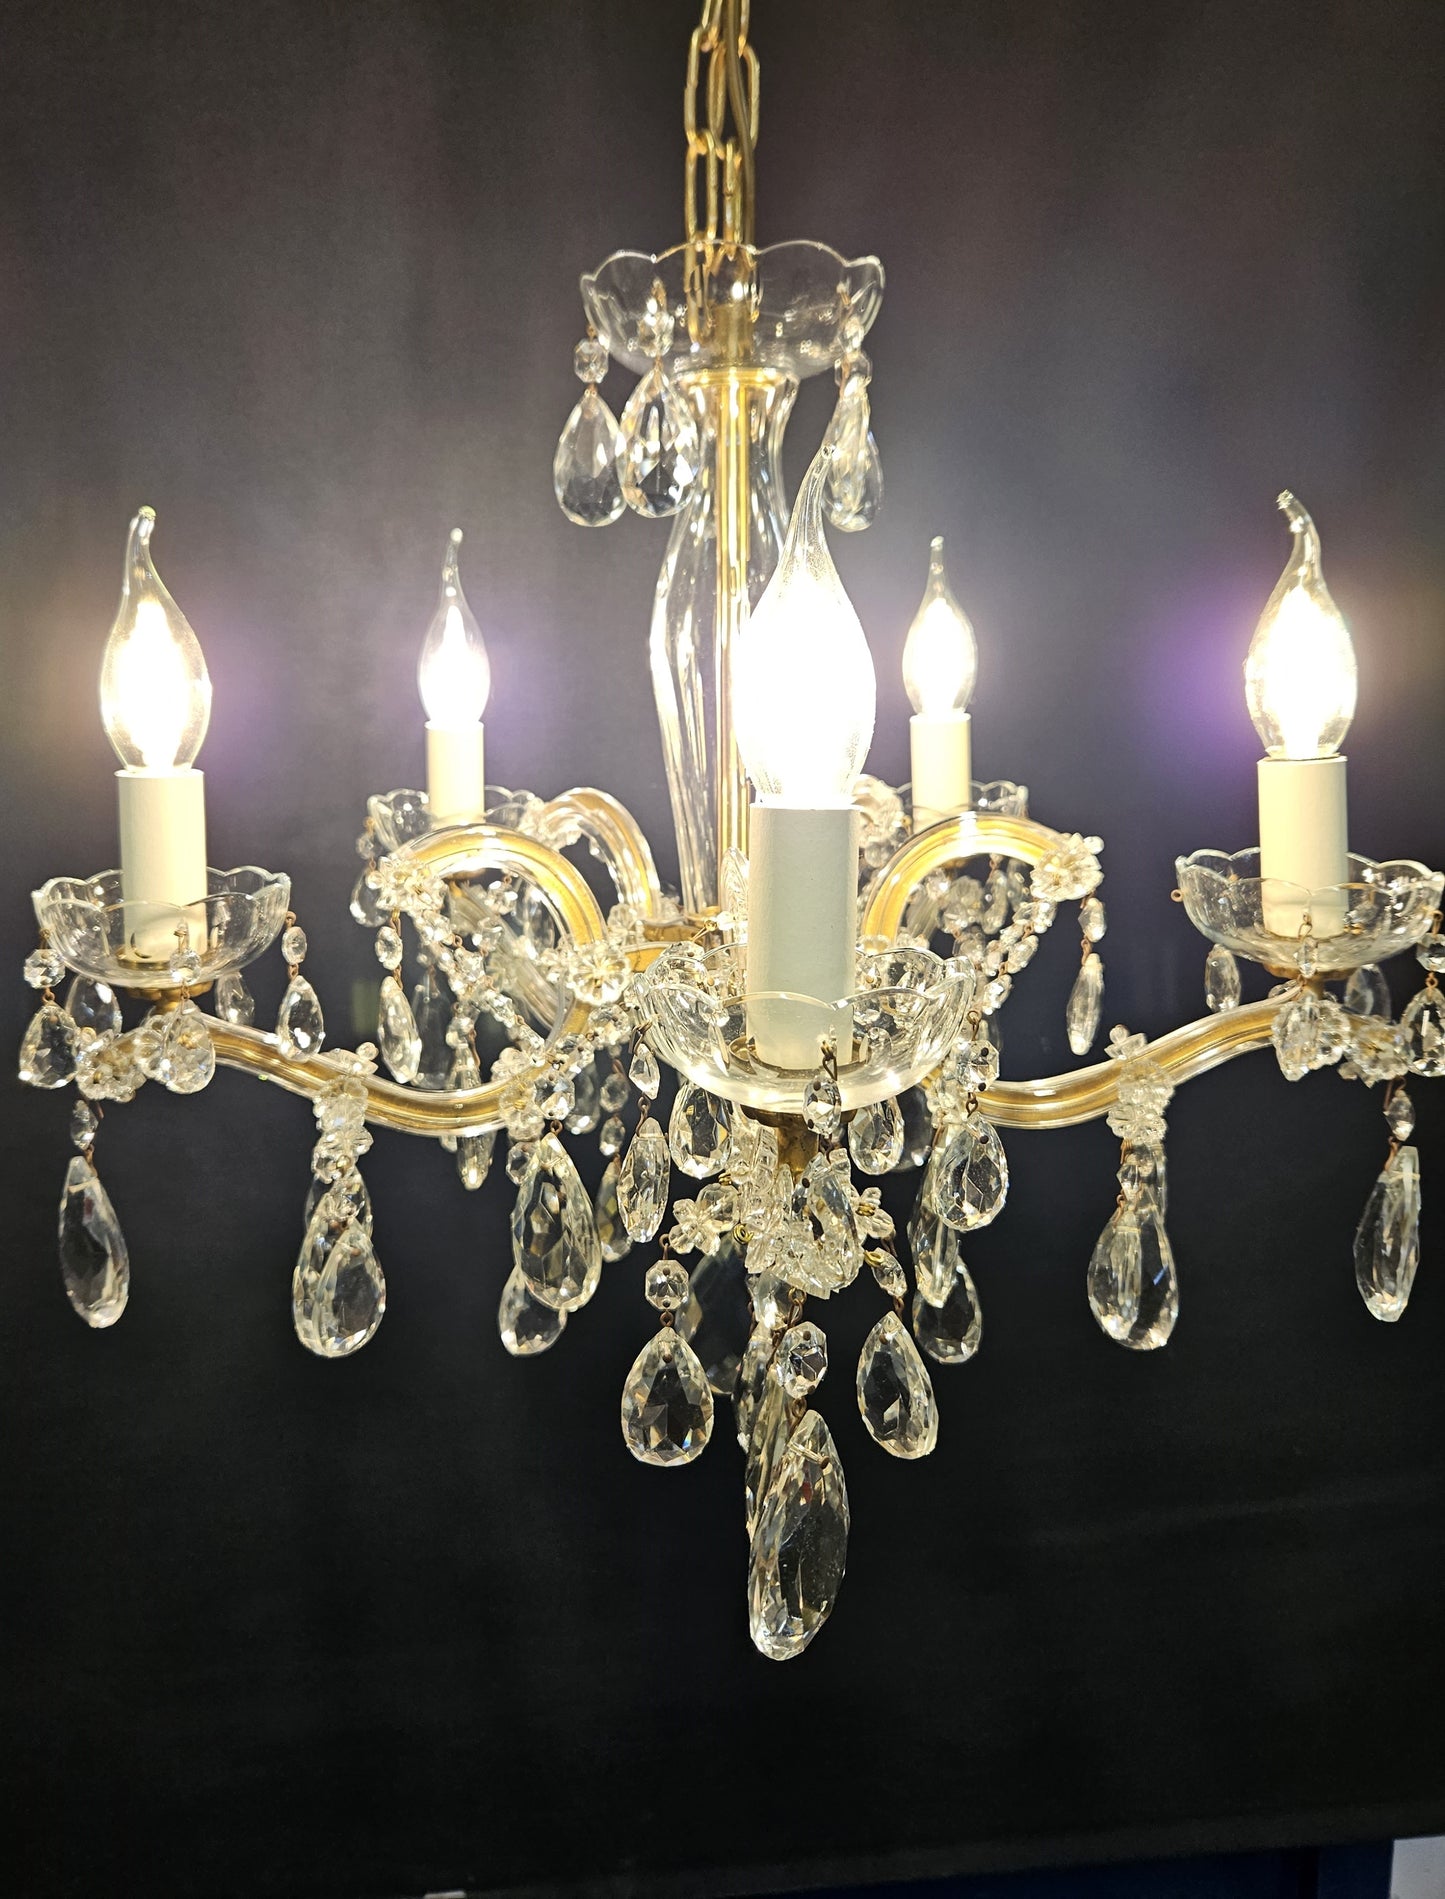 5-Arm Marie Therese Chandelier_lit up